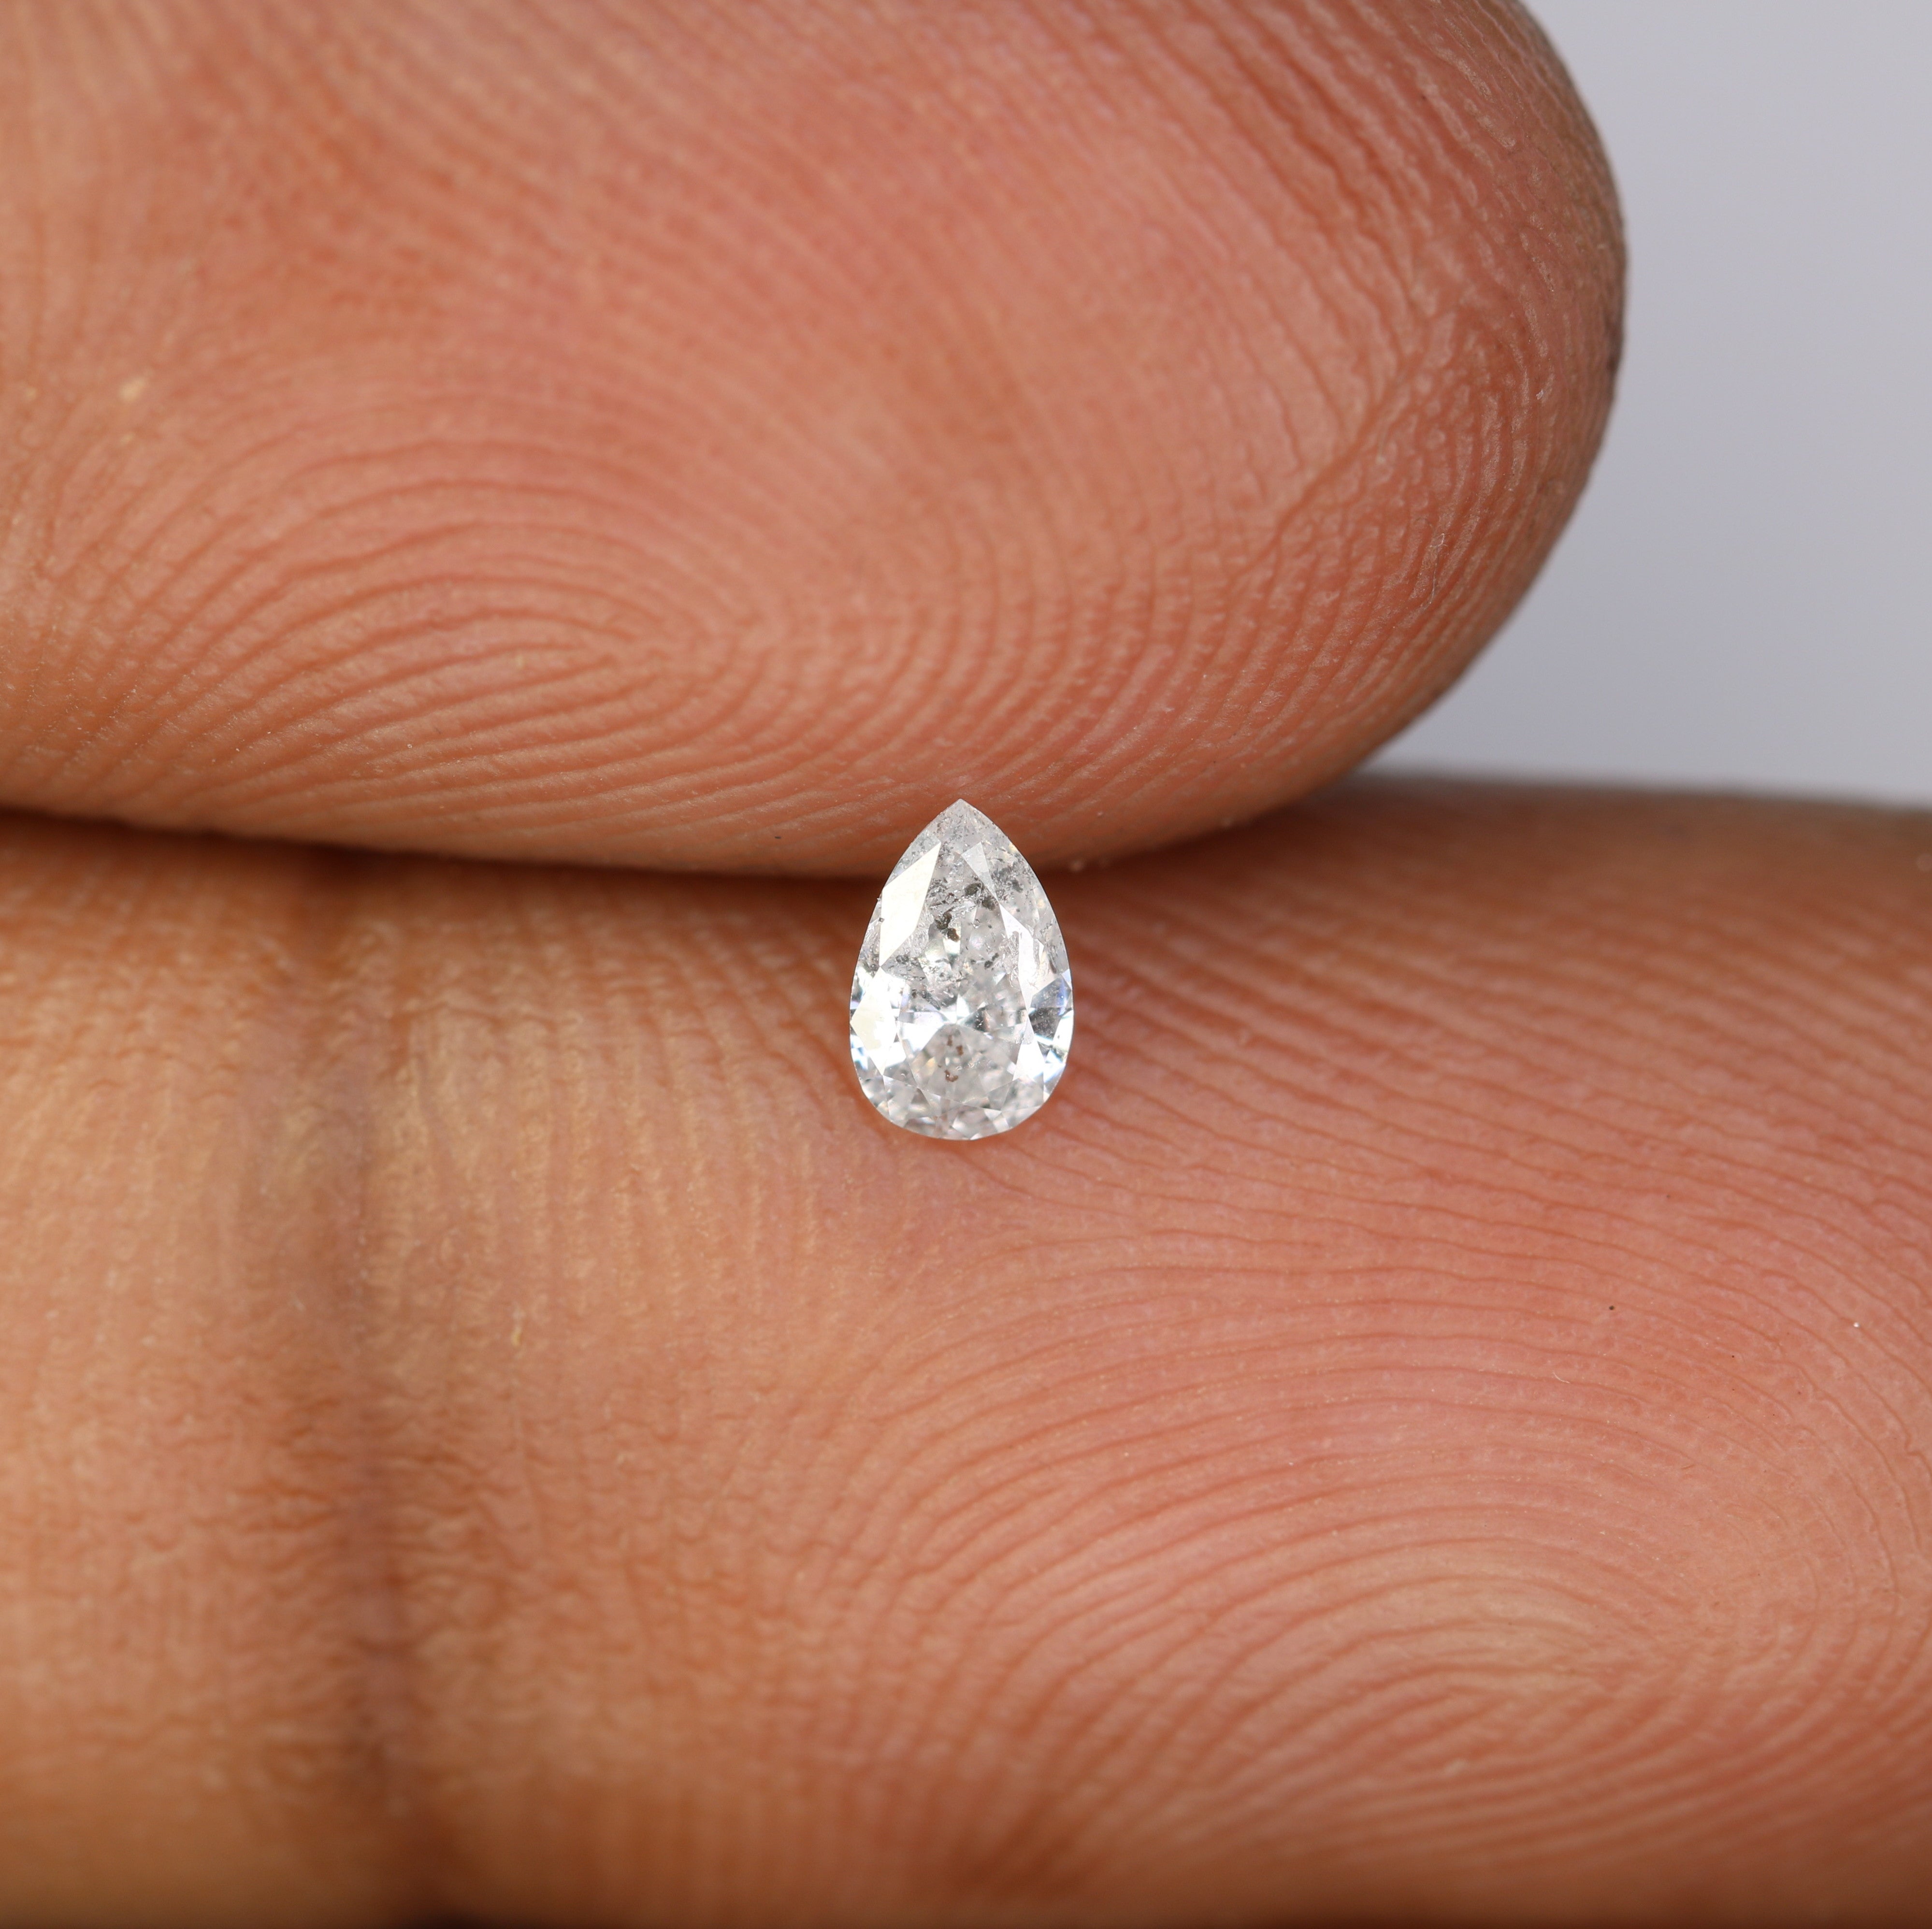 0.17 CT Pear Shape Salt And Pepper Loose Diamond For Engagement Ring